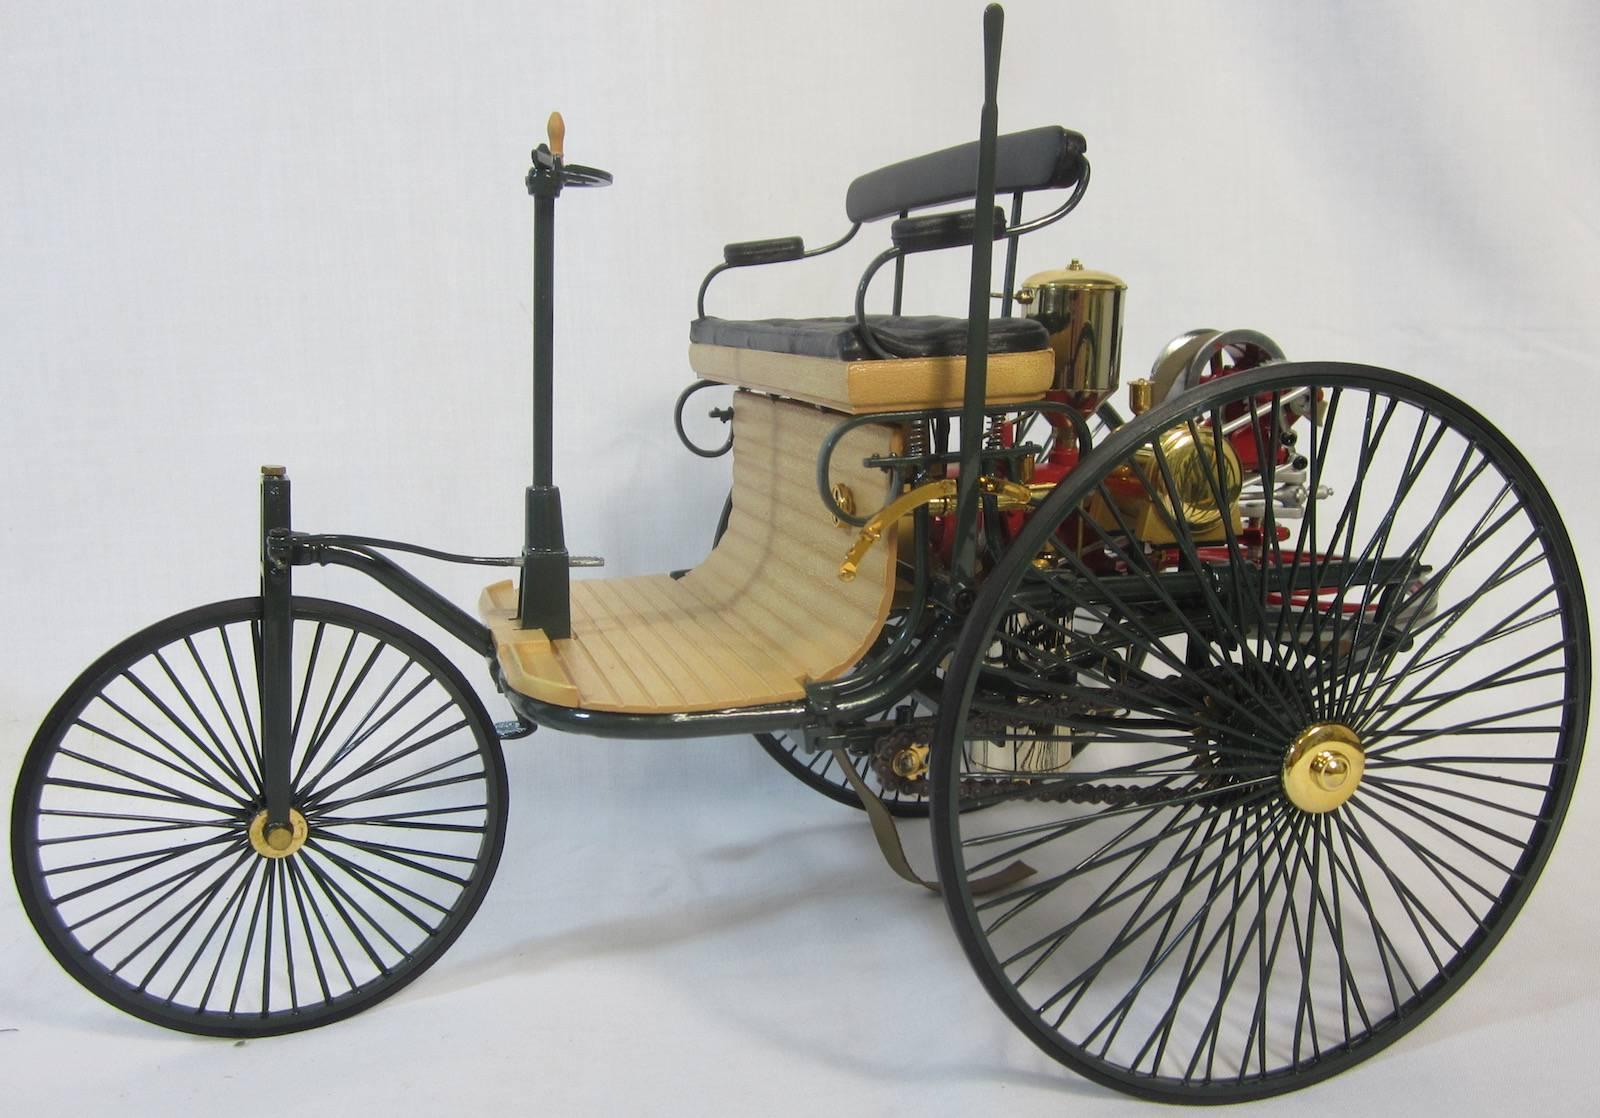 Highly detailed, replica veteran three-wheel steam powered motor vehicle in a glass display cabinet.
Cabinet measures 42 x 29 x 32 cm high
Vehicle measures approximately 28 cm long.